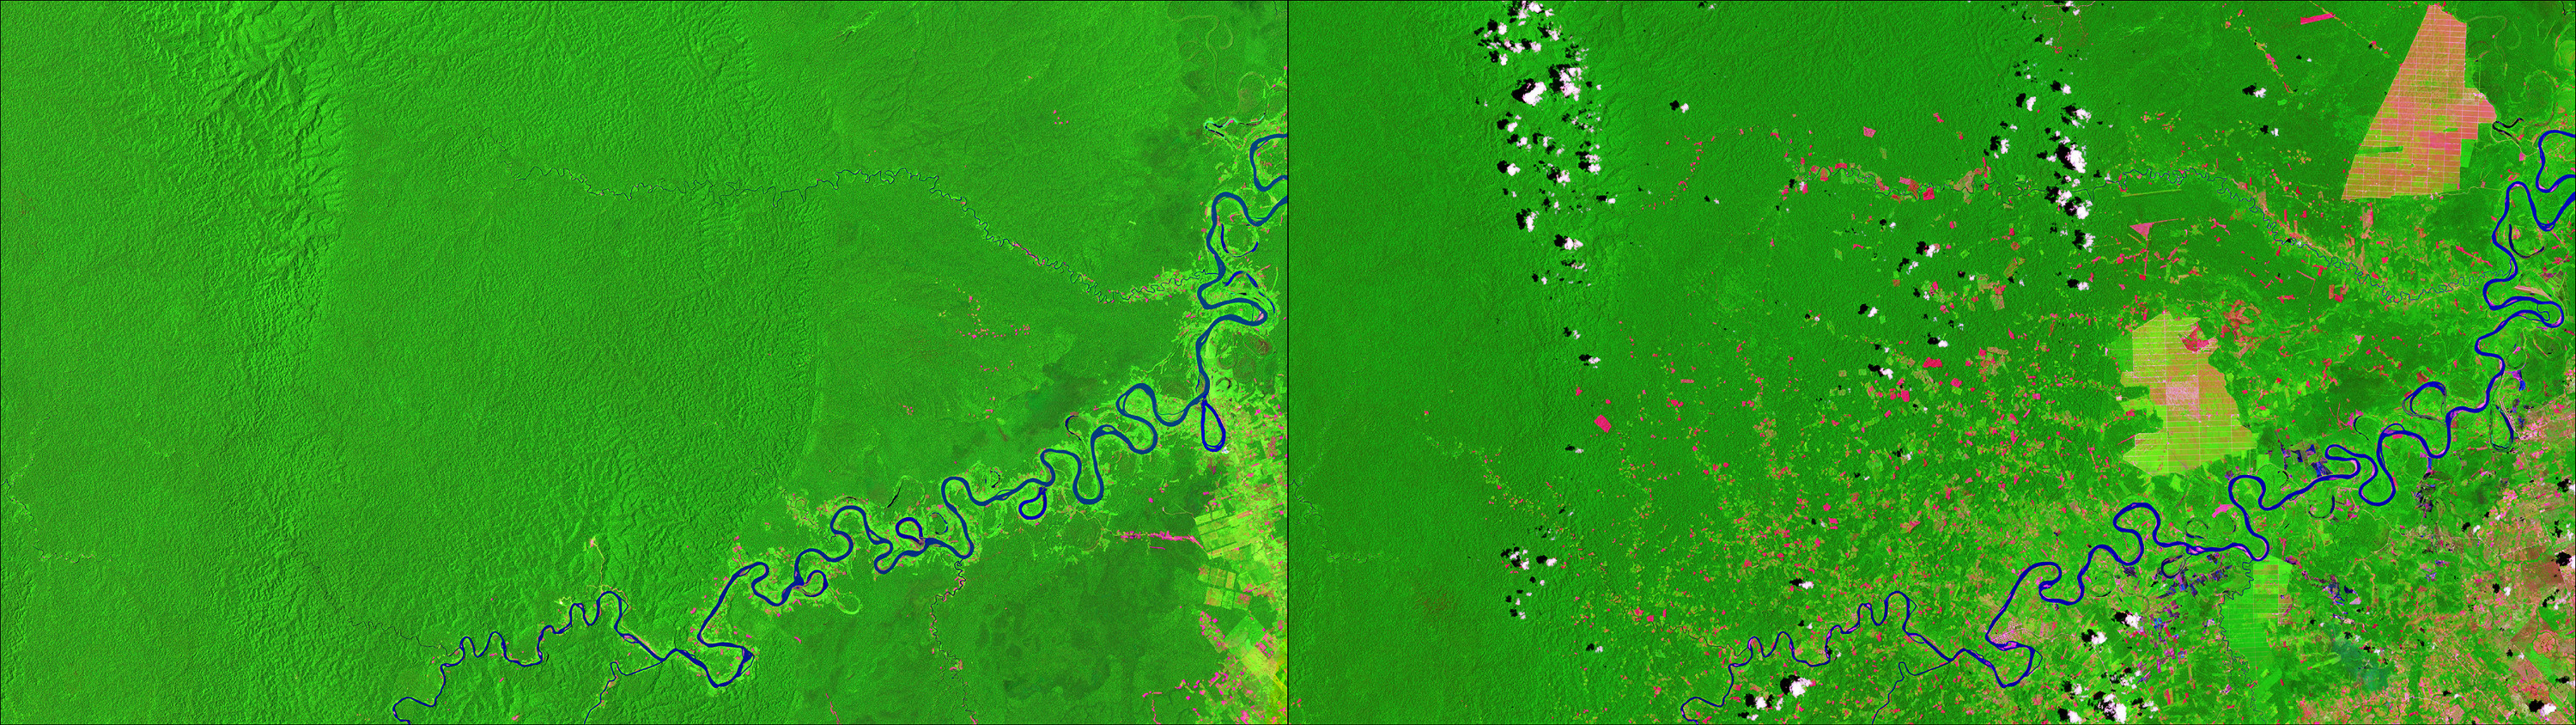 Photos: Deforestation near Pucallpa, Peruvian Amazon, November 13, 1986 (left) - October 30, 2016 (Right). Source: U.S. Geological Survey (USGS) Landsat Missions Gallery: "Monitoring Deforestation in the Amazon"; U.S. Department of the Interior / USGS and NASA.